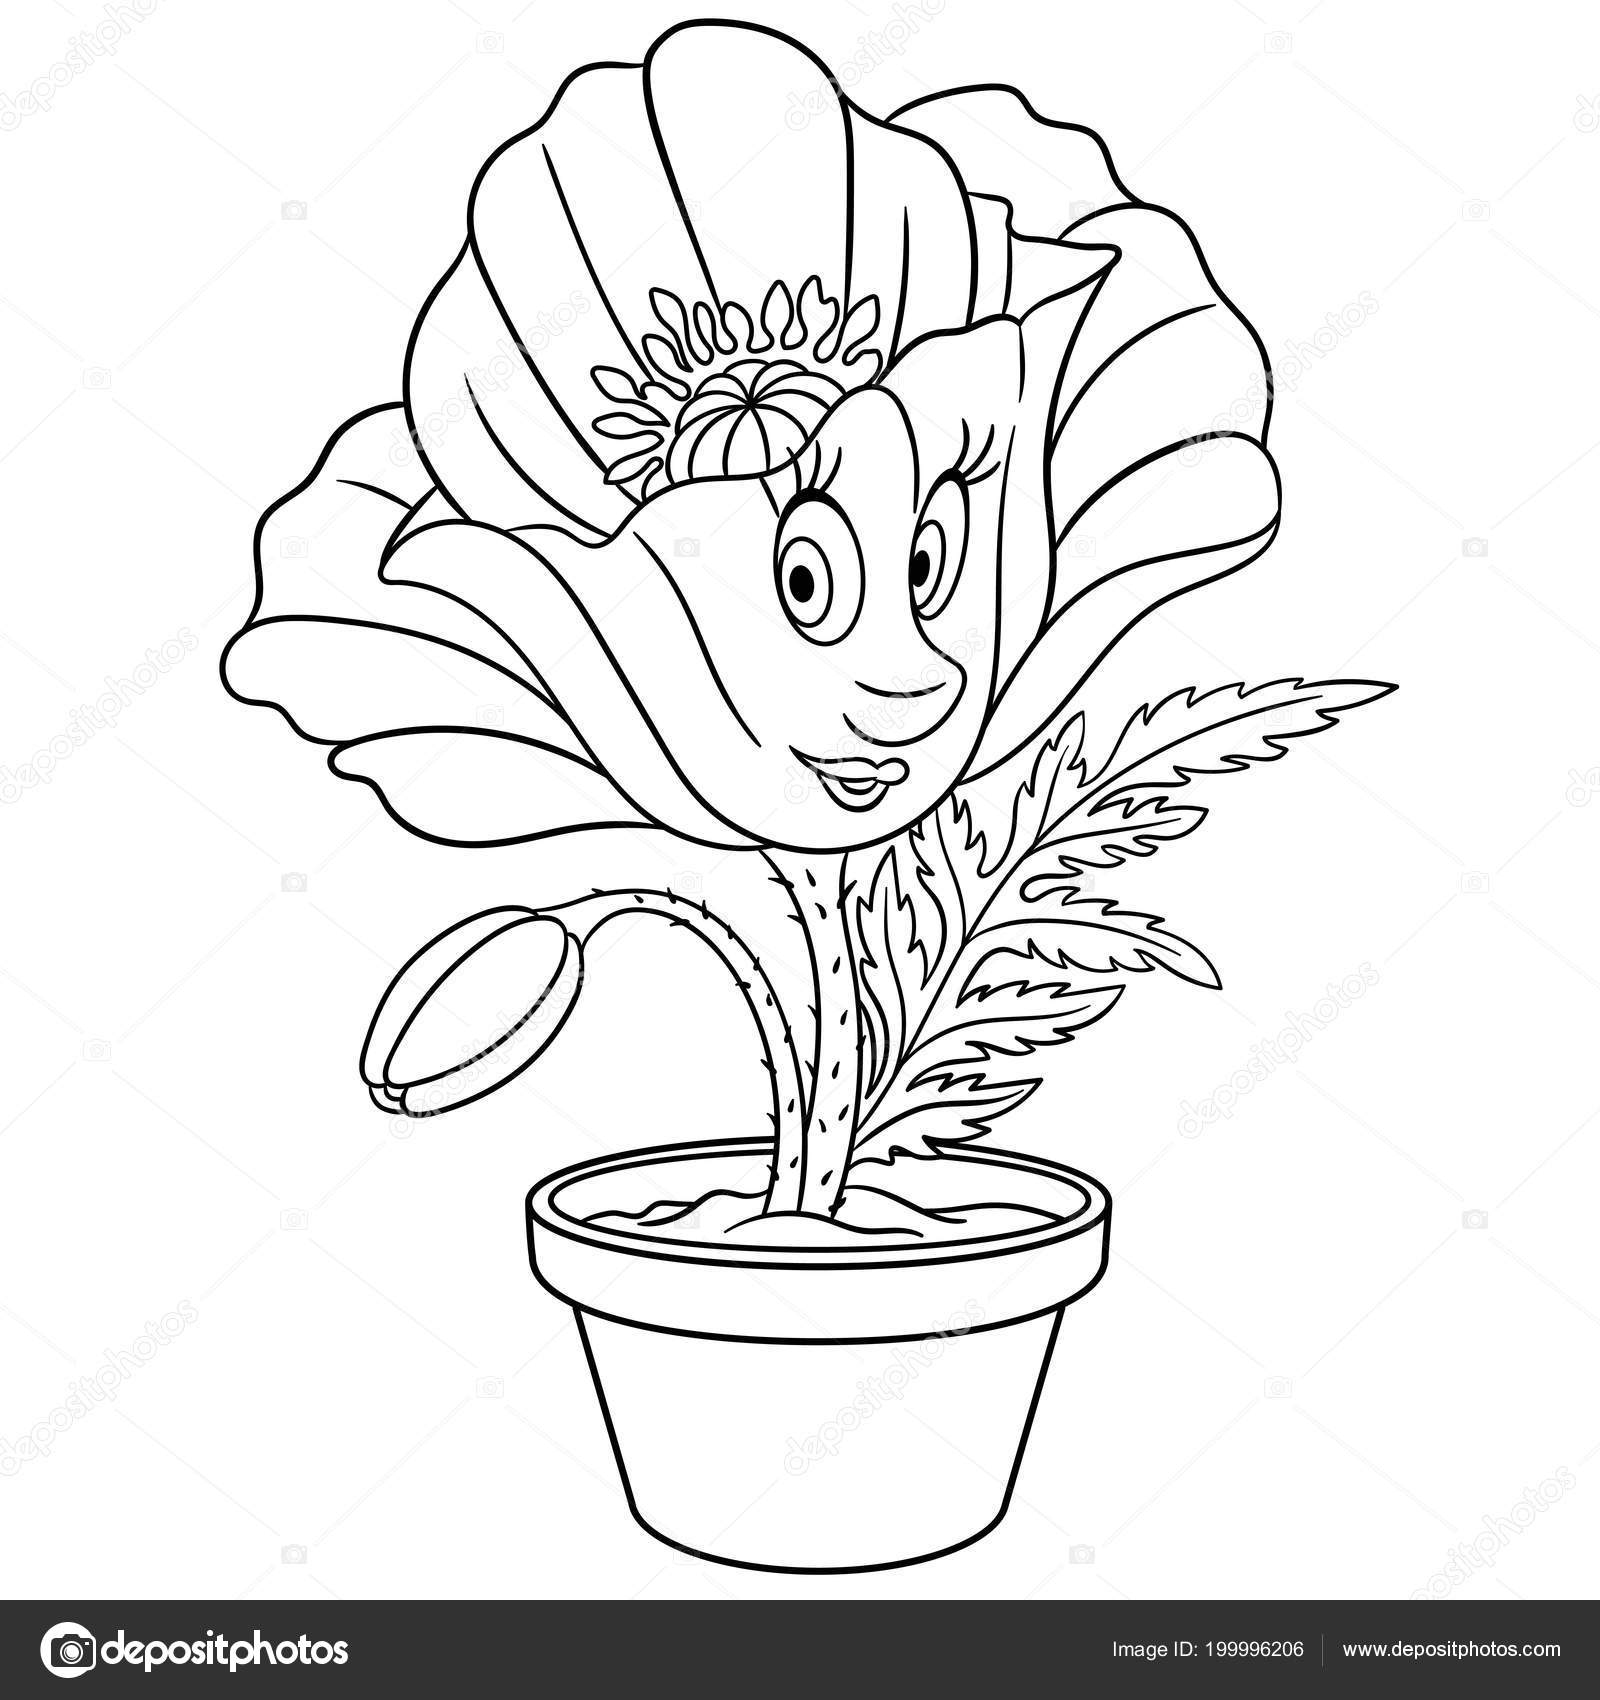 Poppy Flower Pot Coloring Page Colouring Picture Coloring Book ...